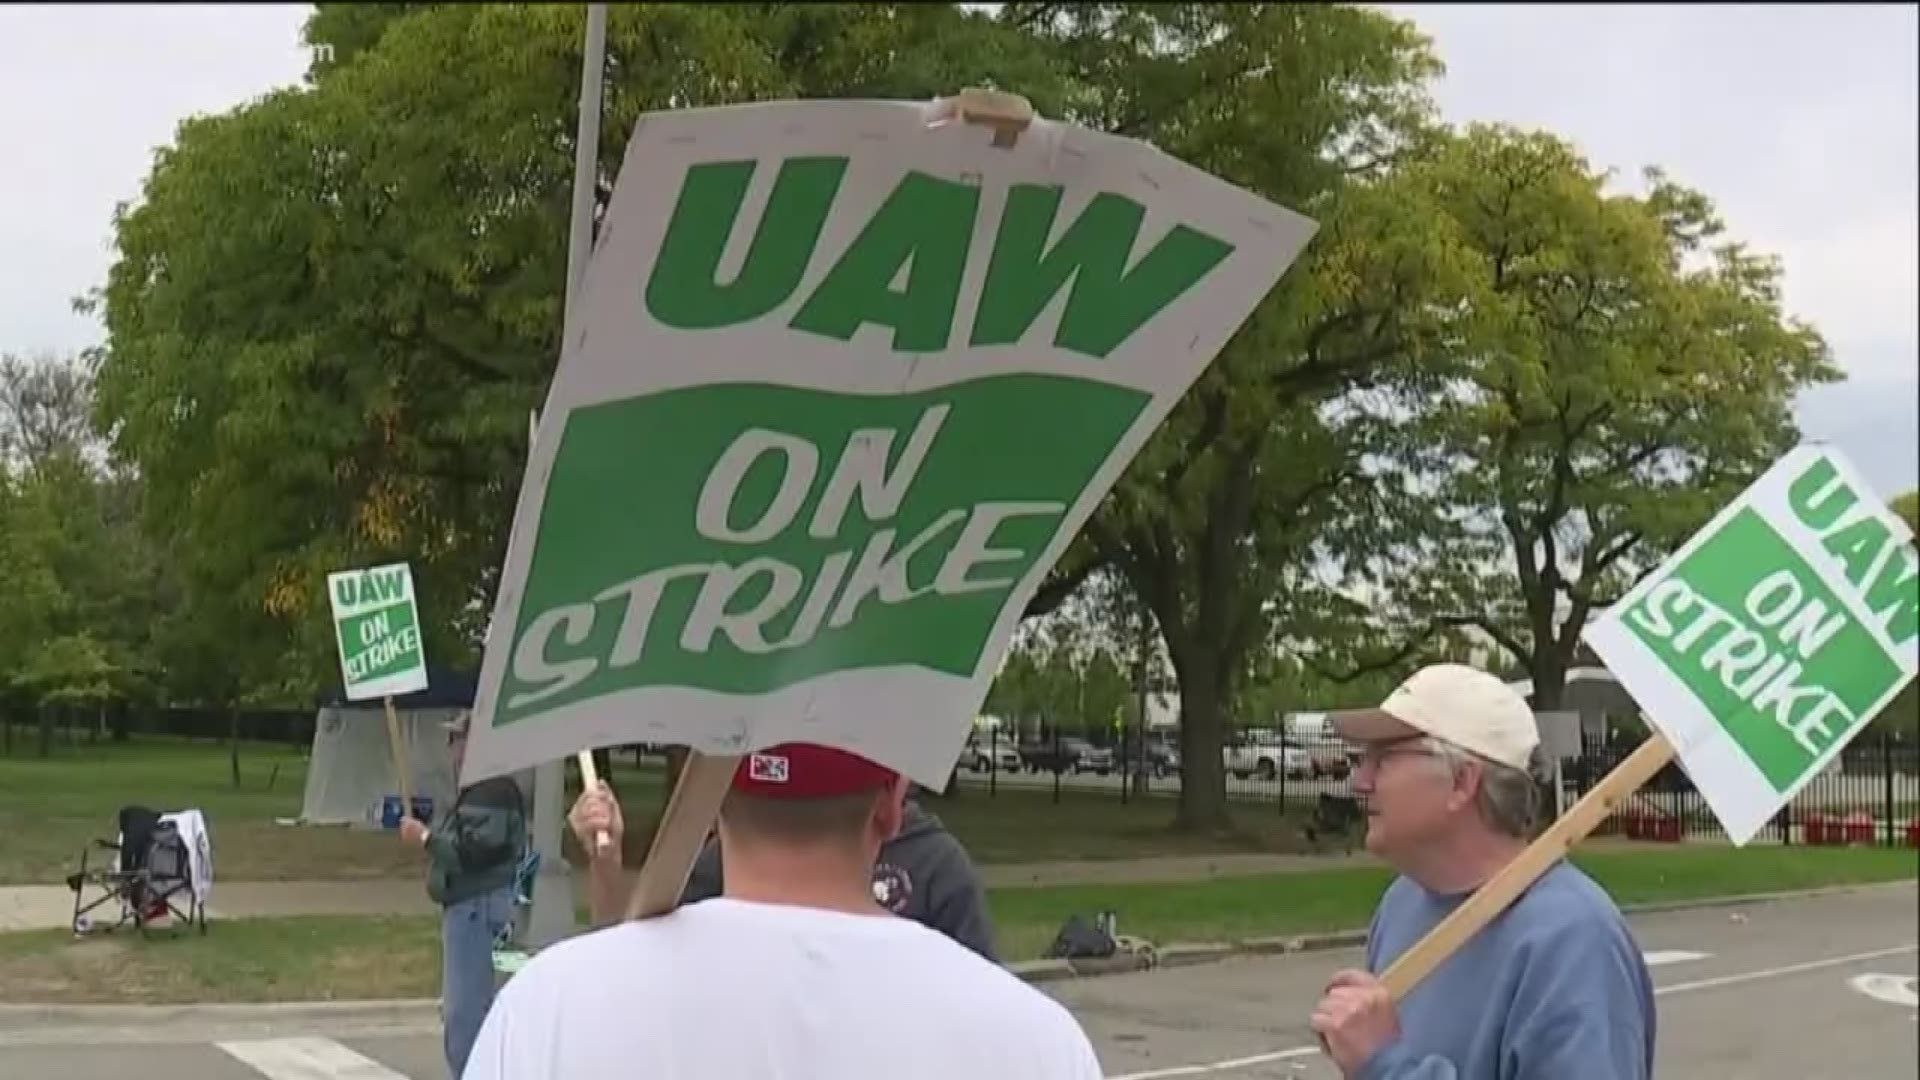 Union workers will vote on the agreement before the strike ends.